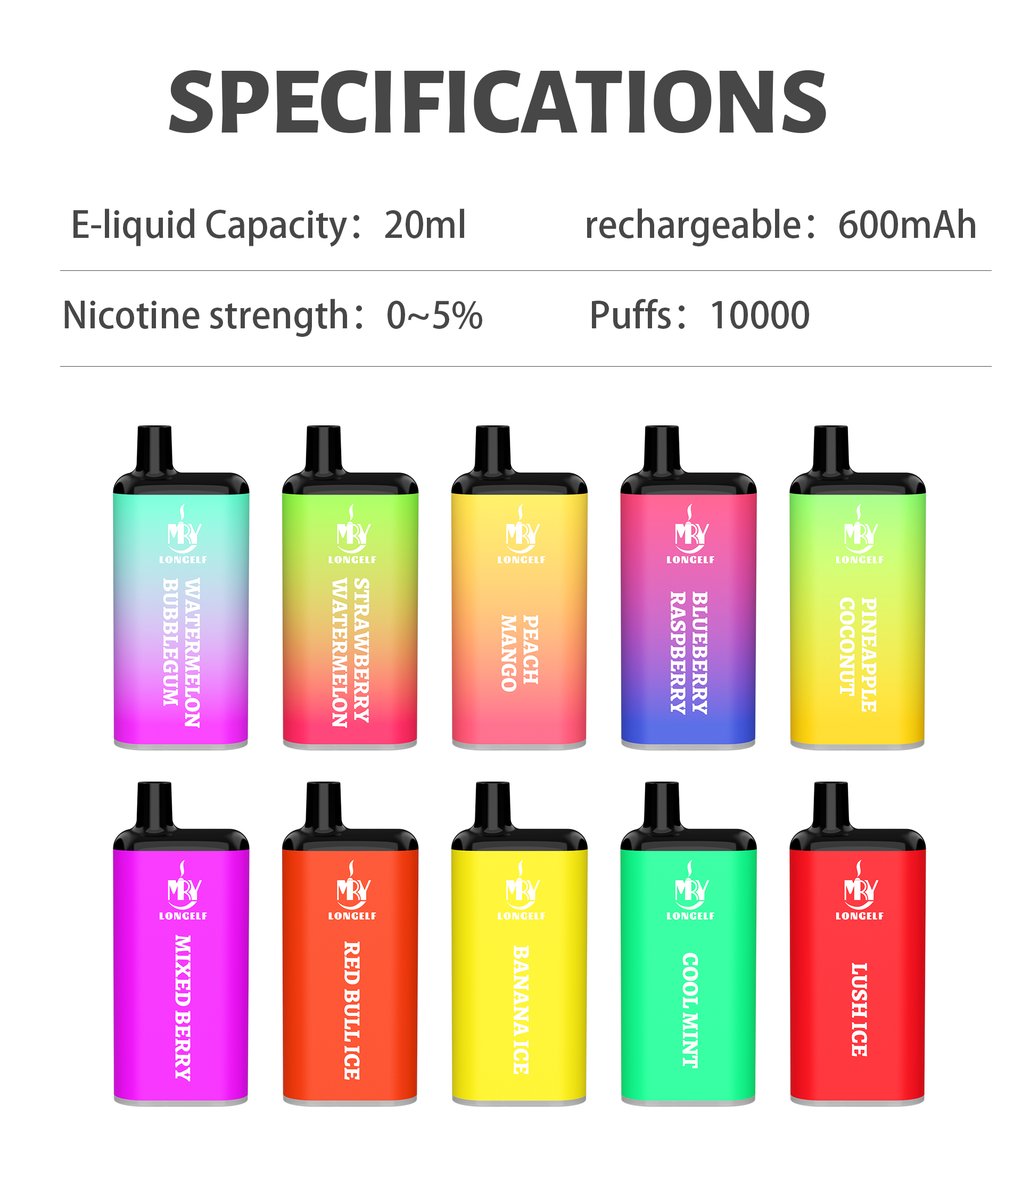 MRY LONGELF 10000puffs,
0%~5% nicotine,
Mesh coil,
Capacity:18ml,
Rechargeable Battery: 650mah,
10000puffs,

Primary source, looking for #ecig agents, wholesalers, #OEM available.
.
.
.
#CleanClikz #vapelife #vapegirl #mryvape #mryvapeofficial #Disposablevape #vapes #vapeon